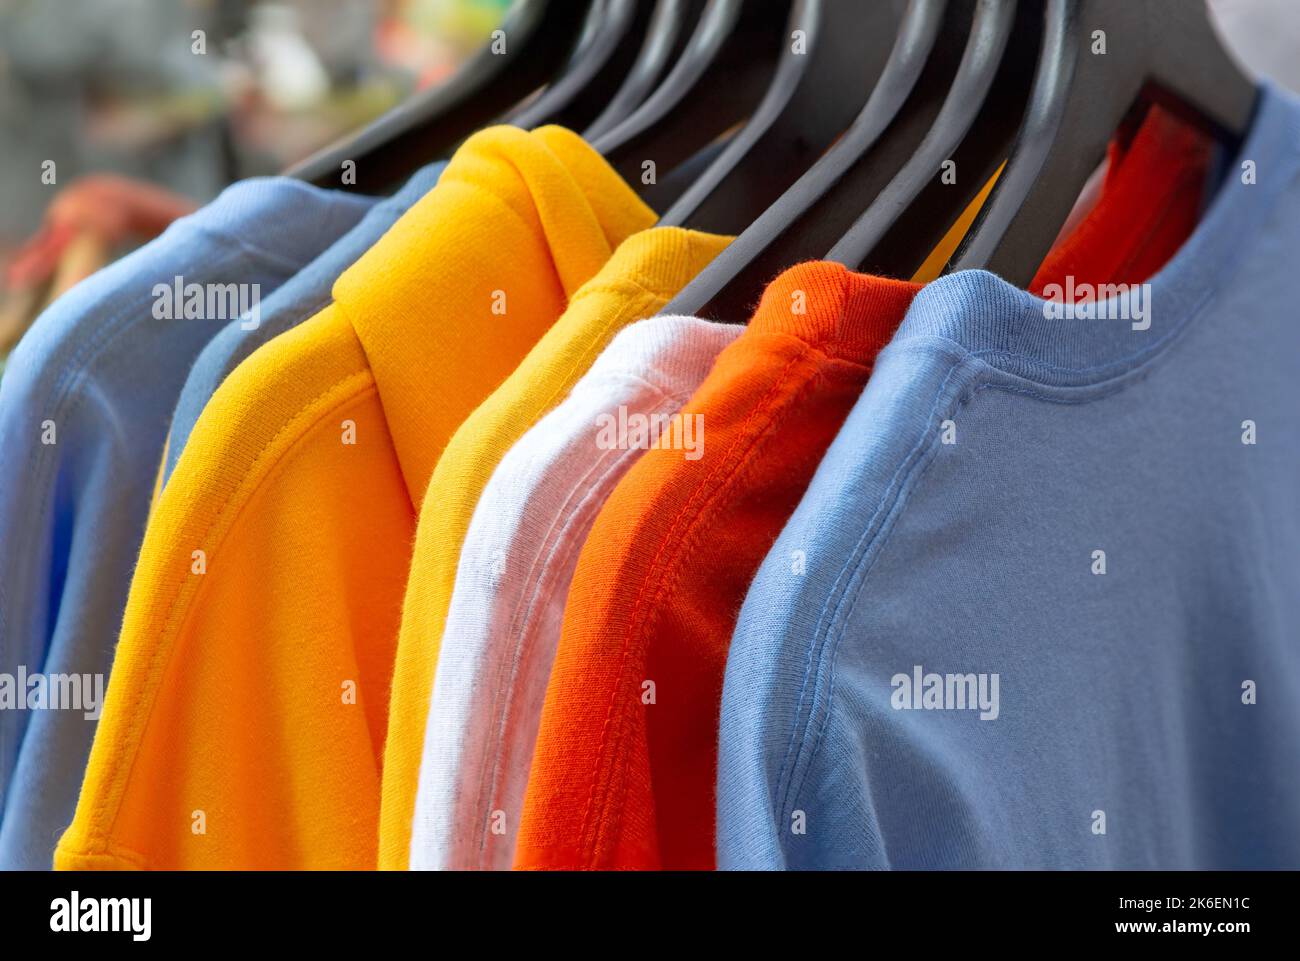 Variety of colorful t-shirts on black hangers at an outdoor shopping event Stock Photo